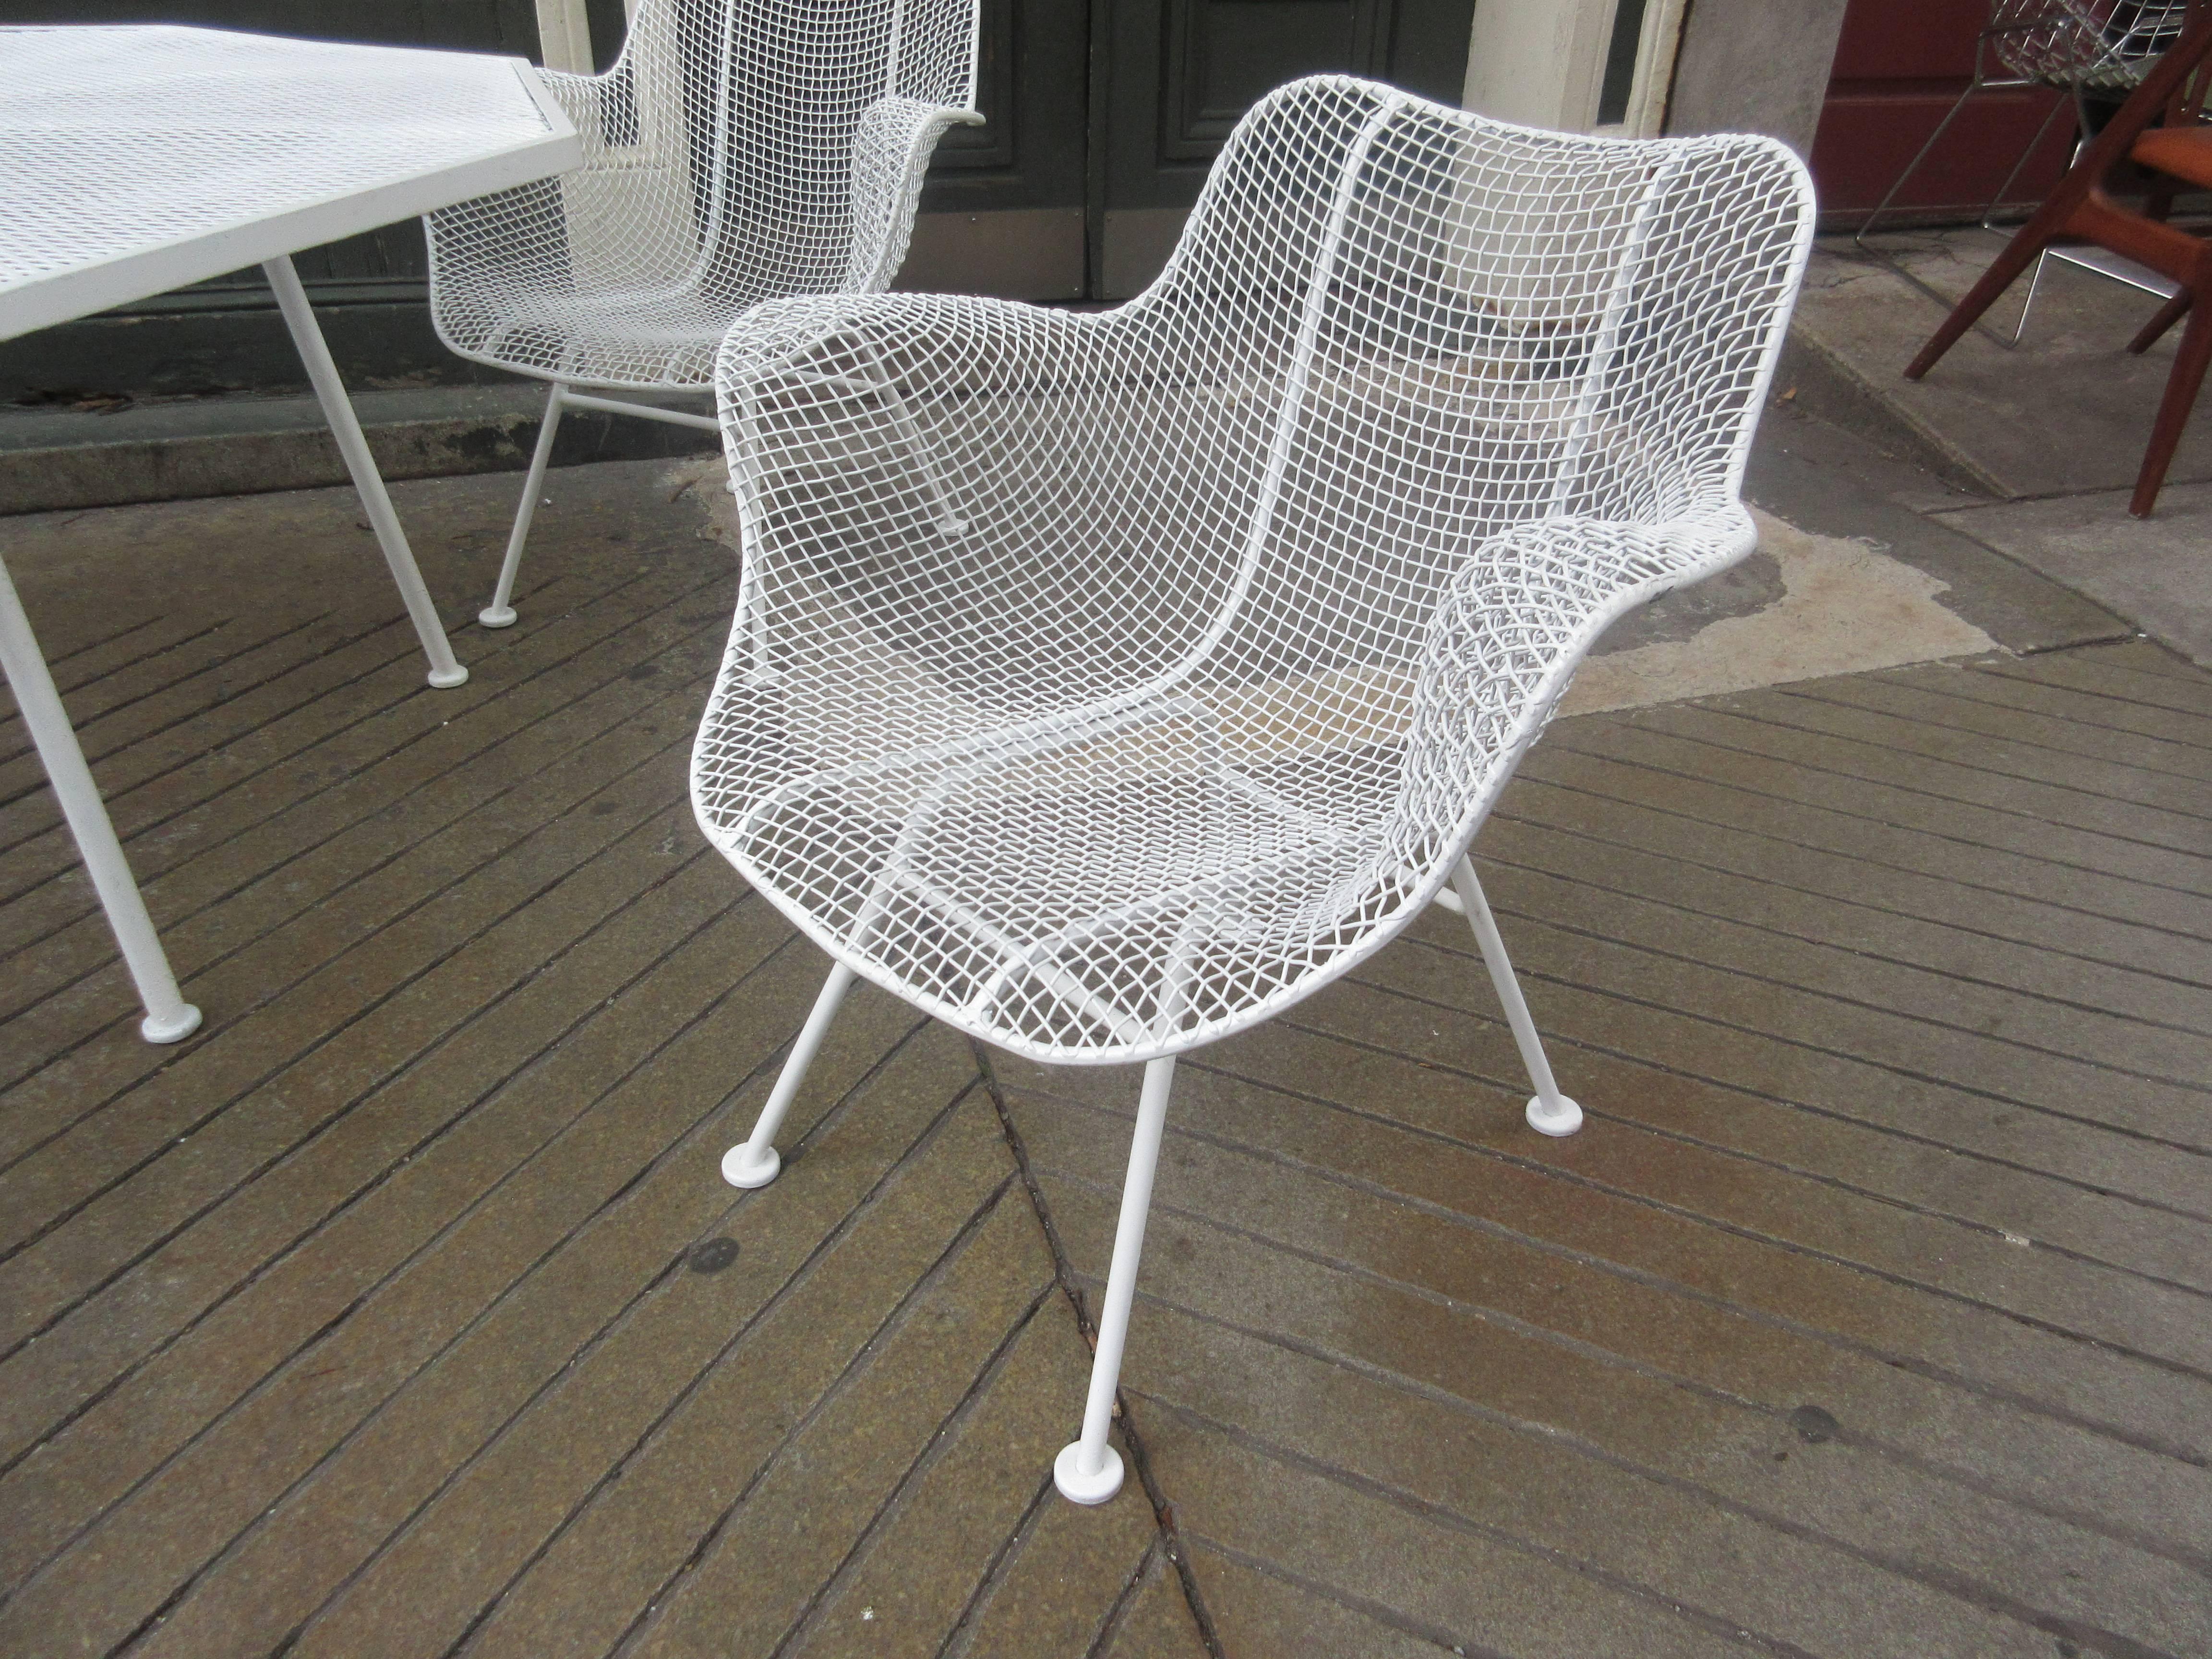 Table and four chairs of rolled, mesh, wrought and tubular steel by Woodard from the Sculptura Line. Hole in middle for outdoor umbrella.